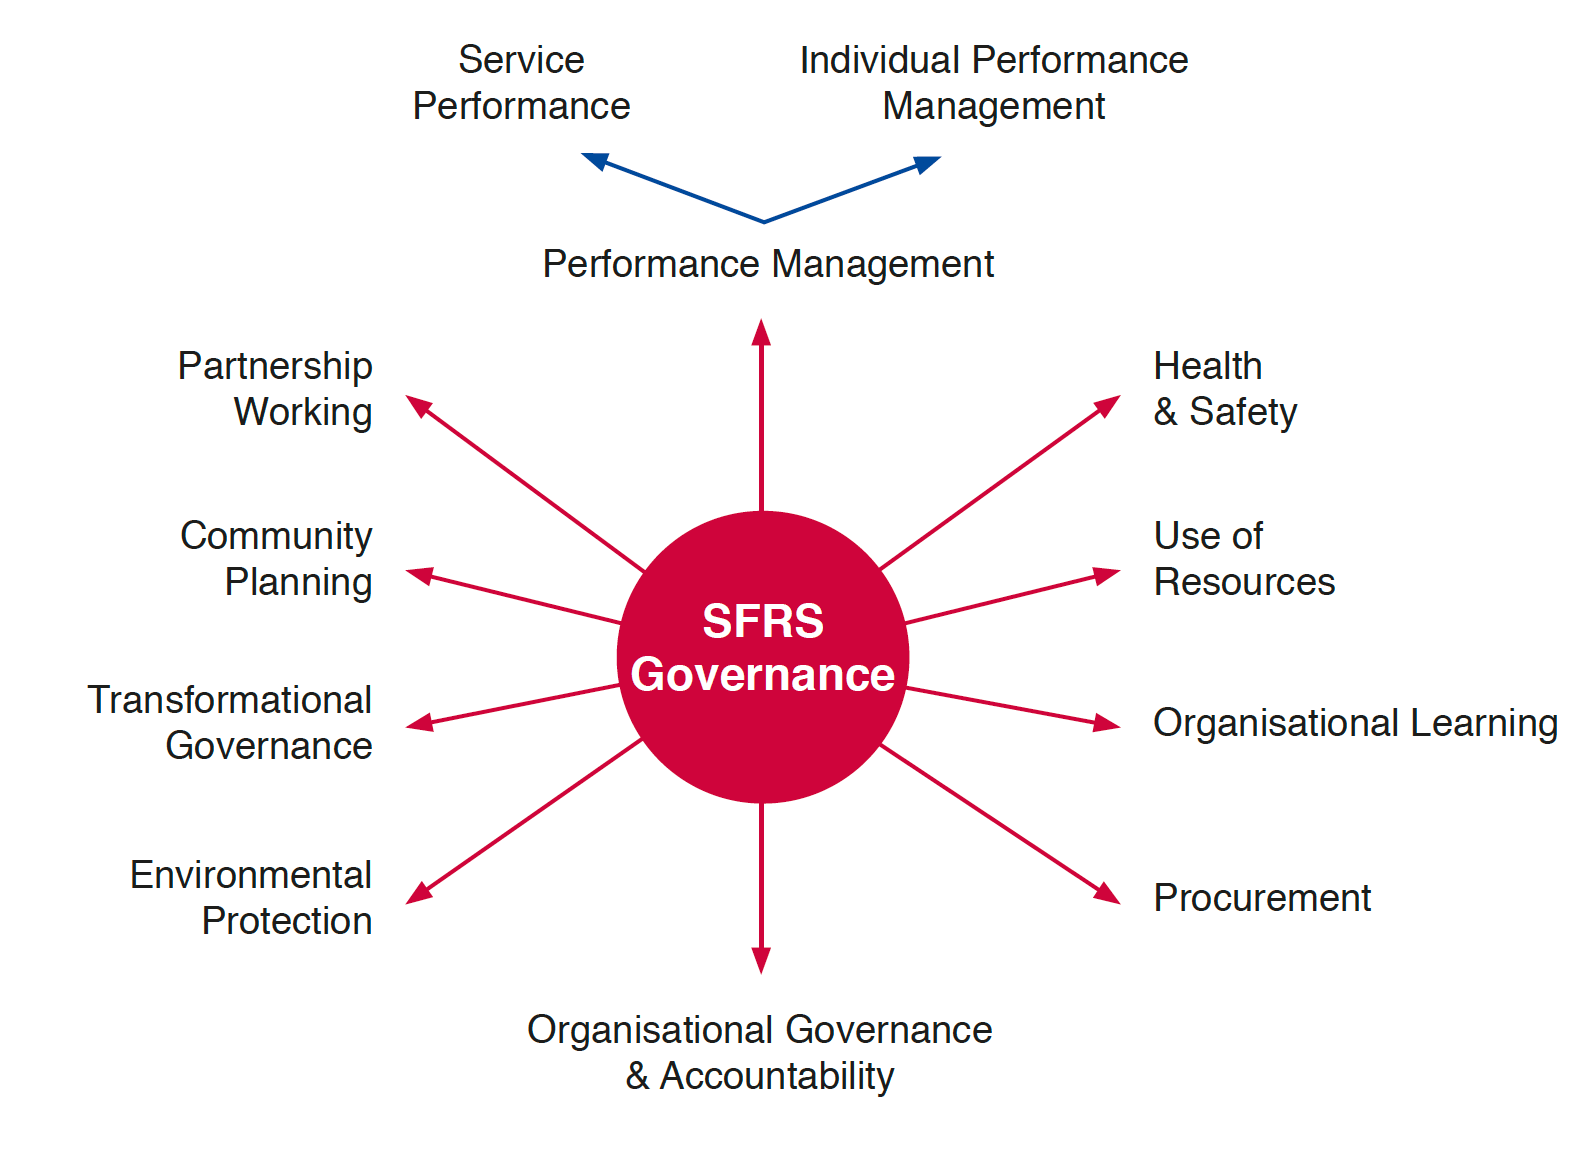 The diagram depicts the aspects which contribute to the SFRS governance model, inclusive of, performance management further broken down to service performance and individual performance management, health and safety, use of resources, organisational learning, procurement, organisational governance and accountability, environmental protection, transformational governance, community planning and partnership working.